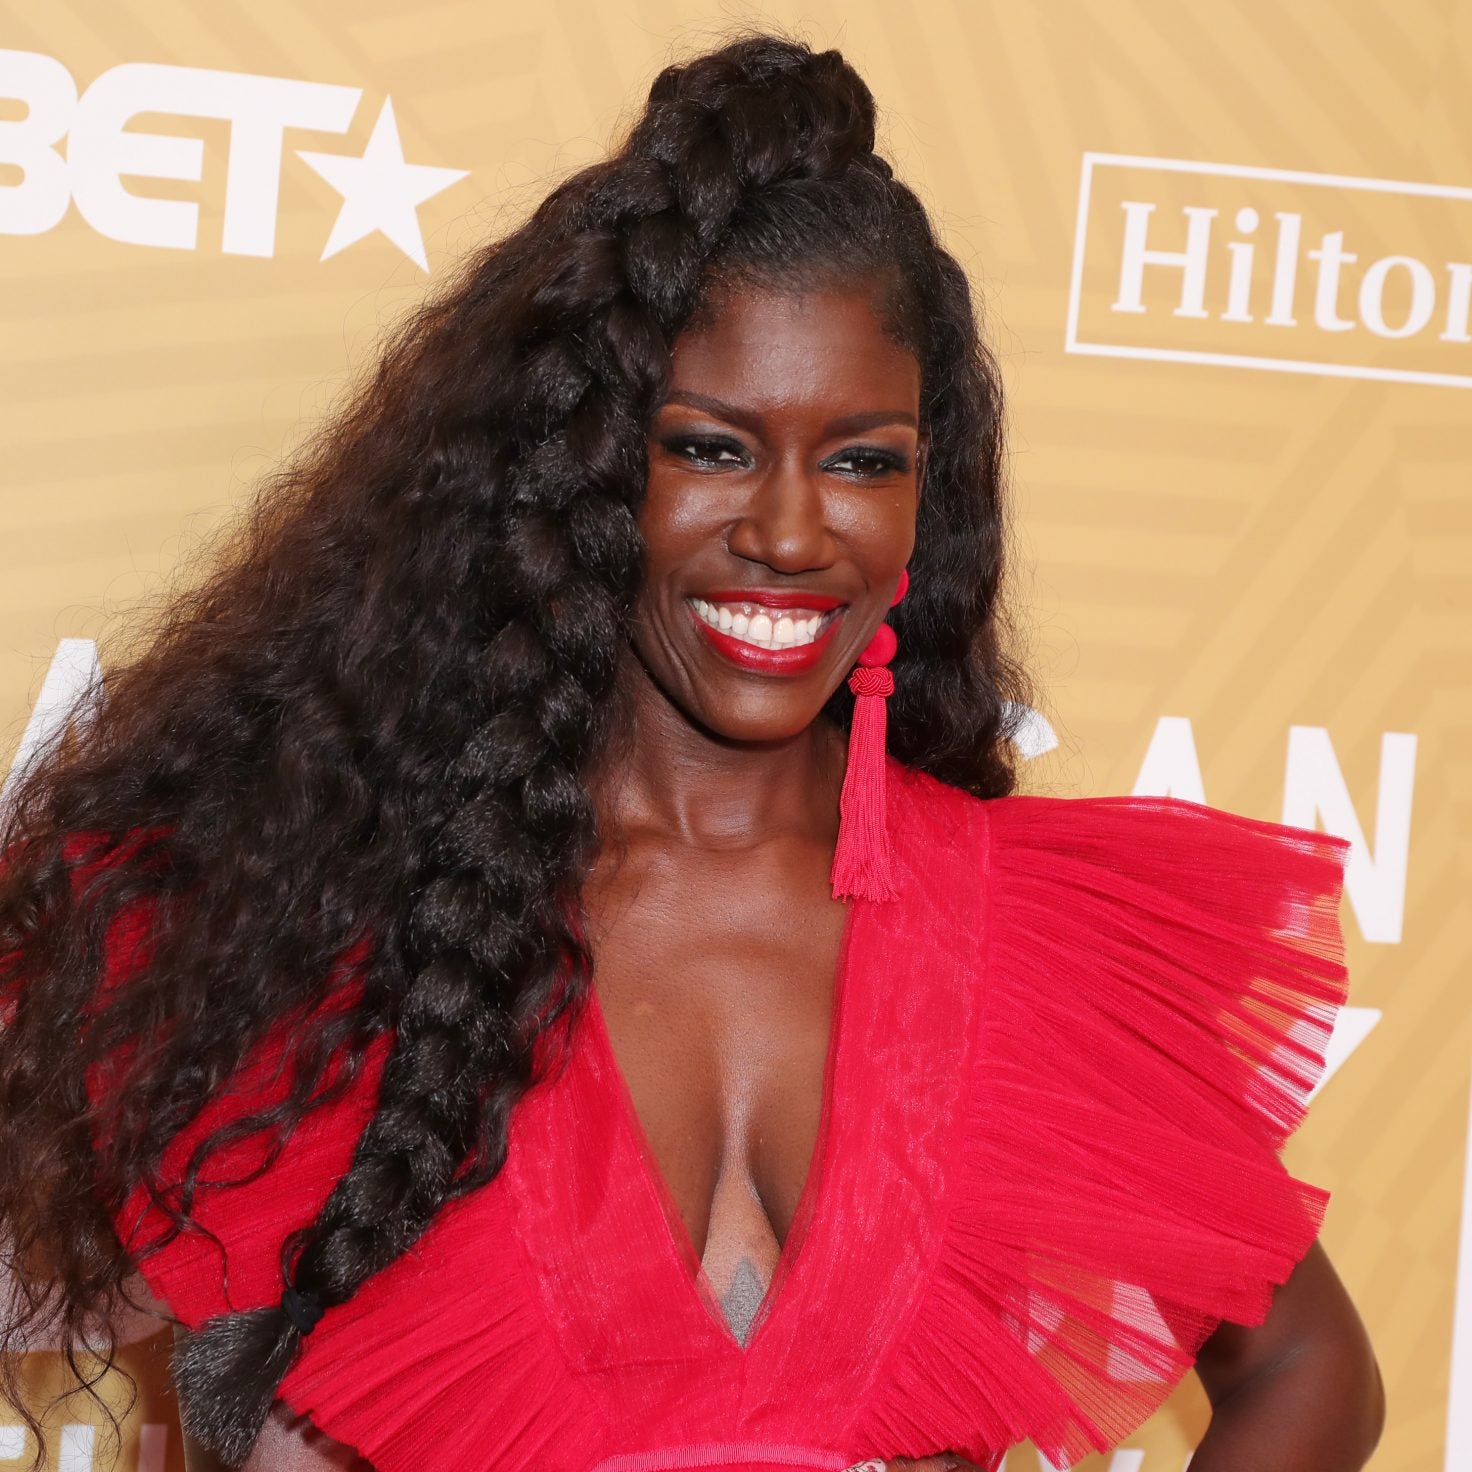 The Internet Is Outraged By A Piece AdAge Wrote About Bozoma Saint John